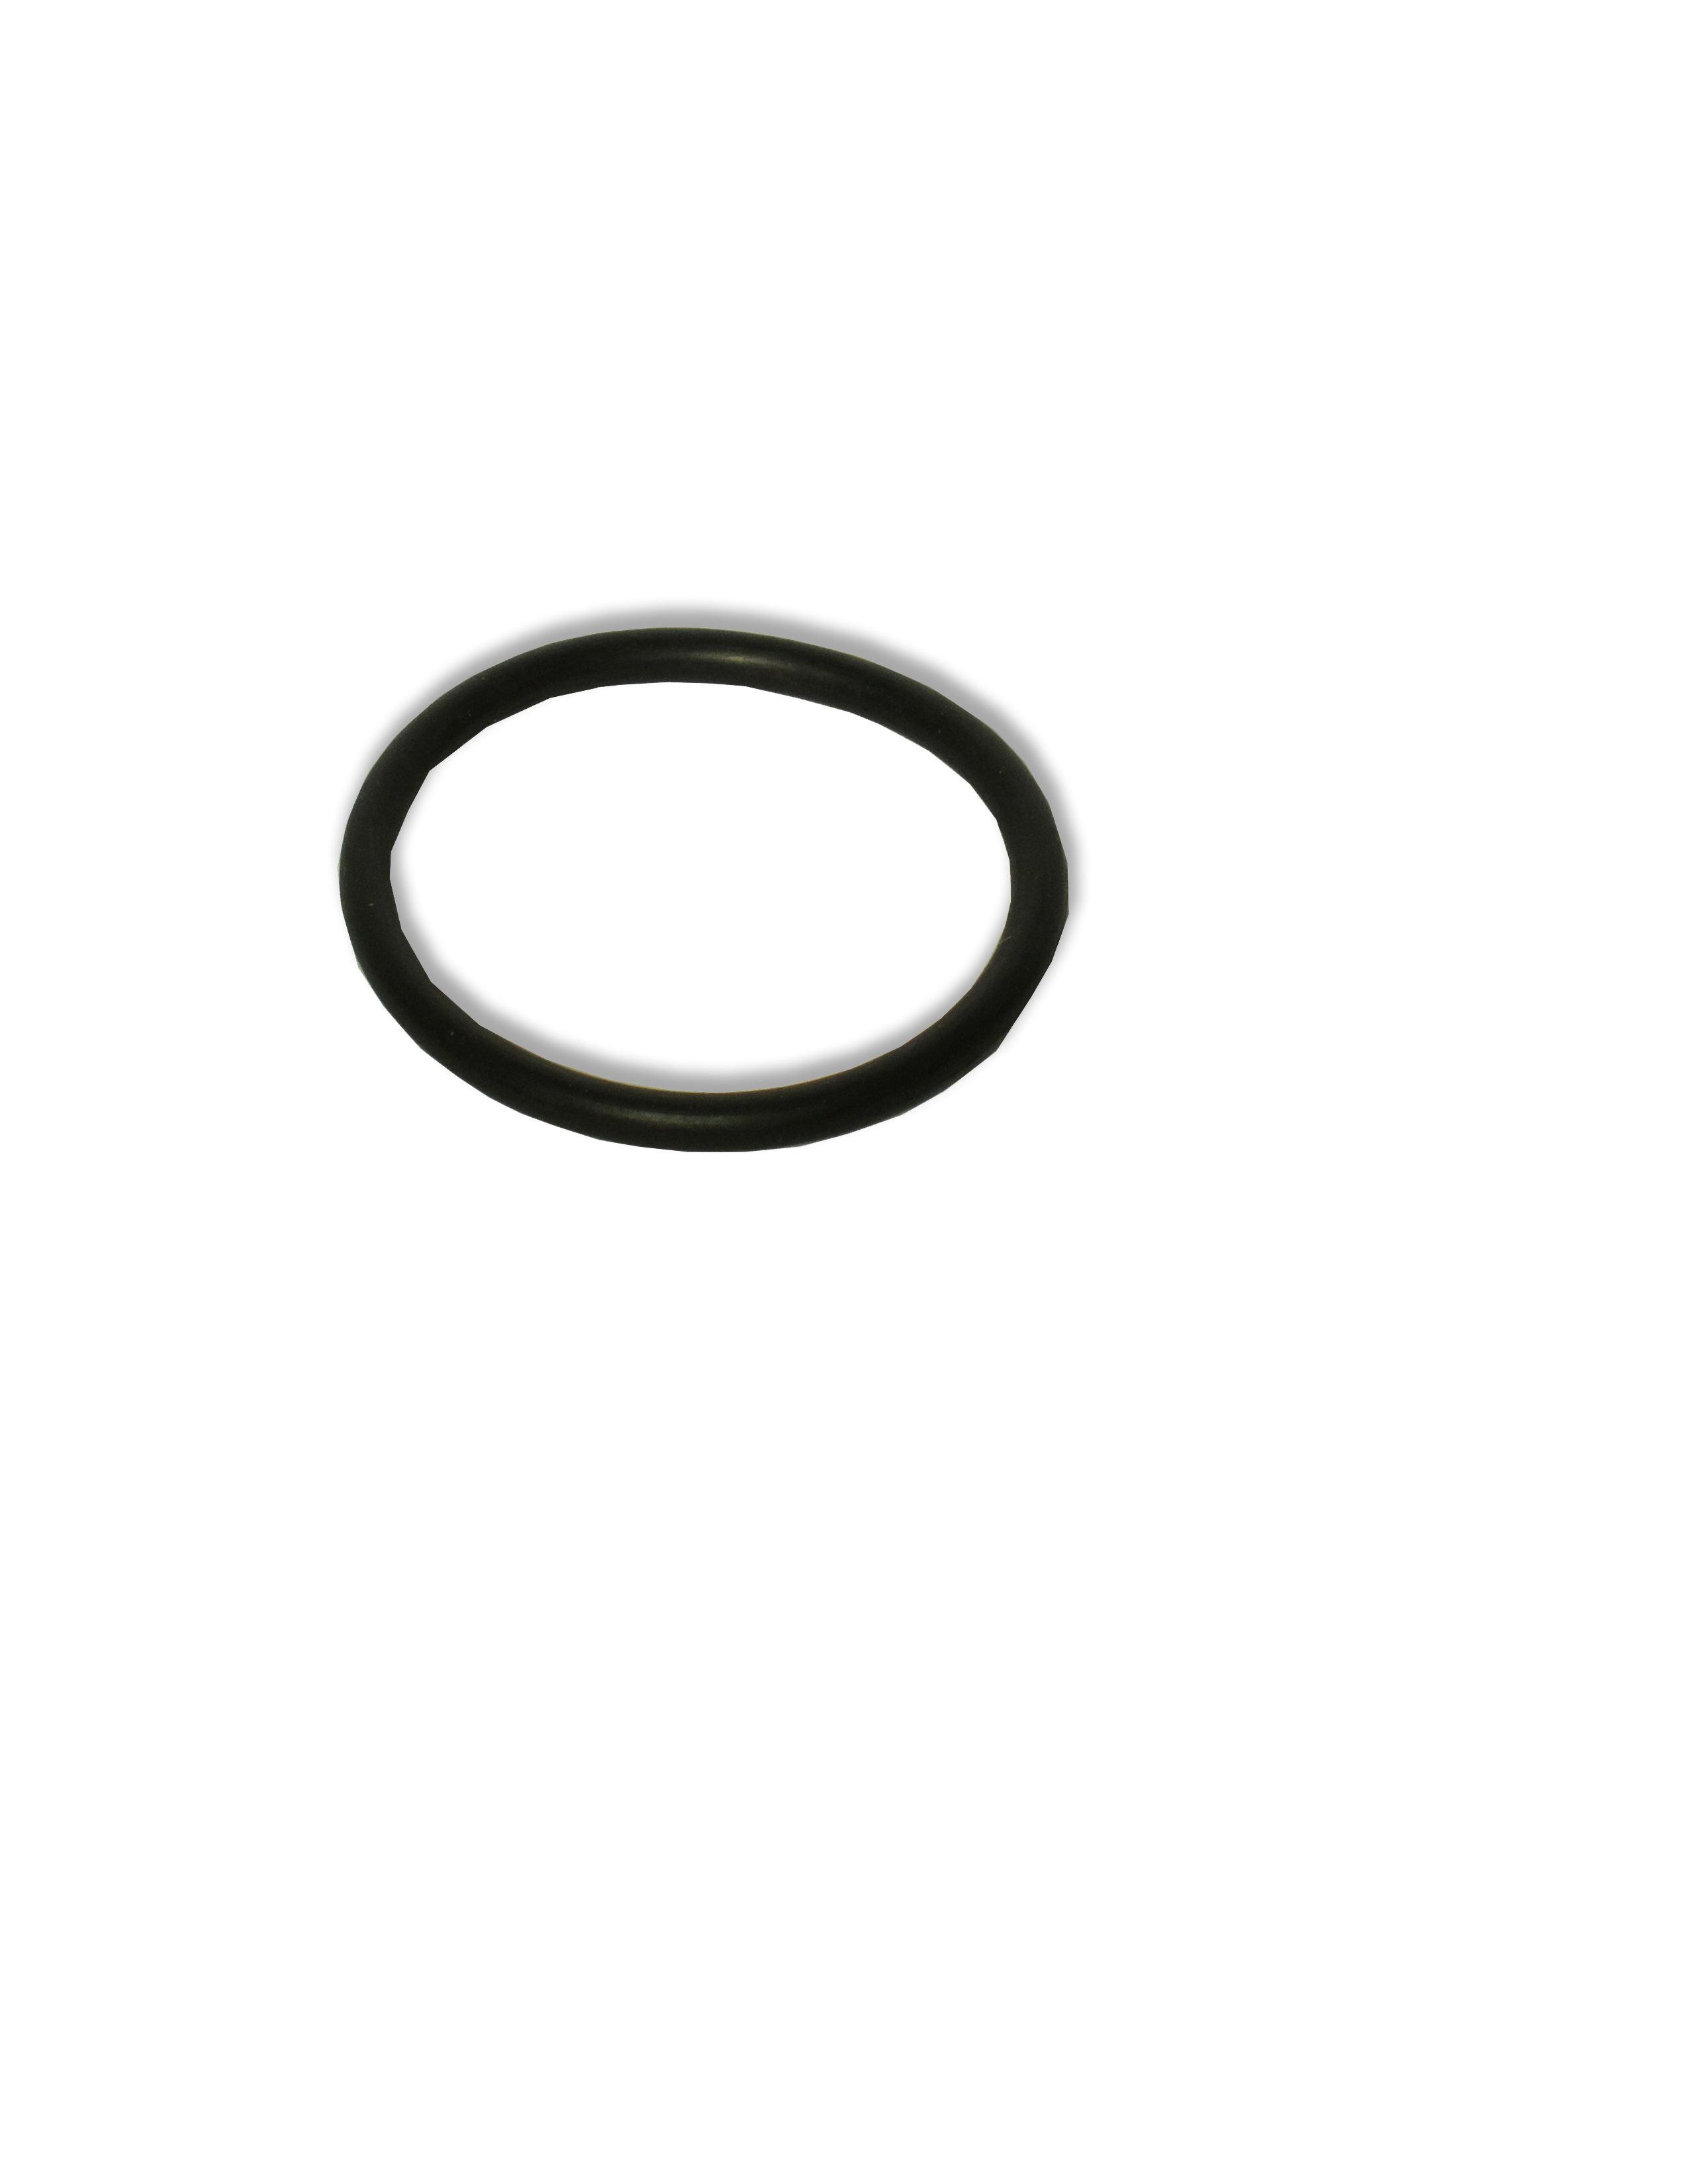 568-222 replacement small o-ring for AO5C 5C collet fixture, replacement small o-ring for AO5C 5C collet fixture, AO5C 5C collet fixture, 5C collet fixture, collet fixture